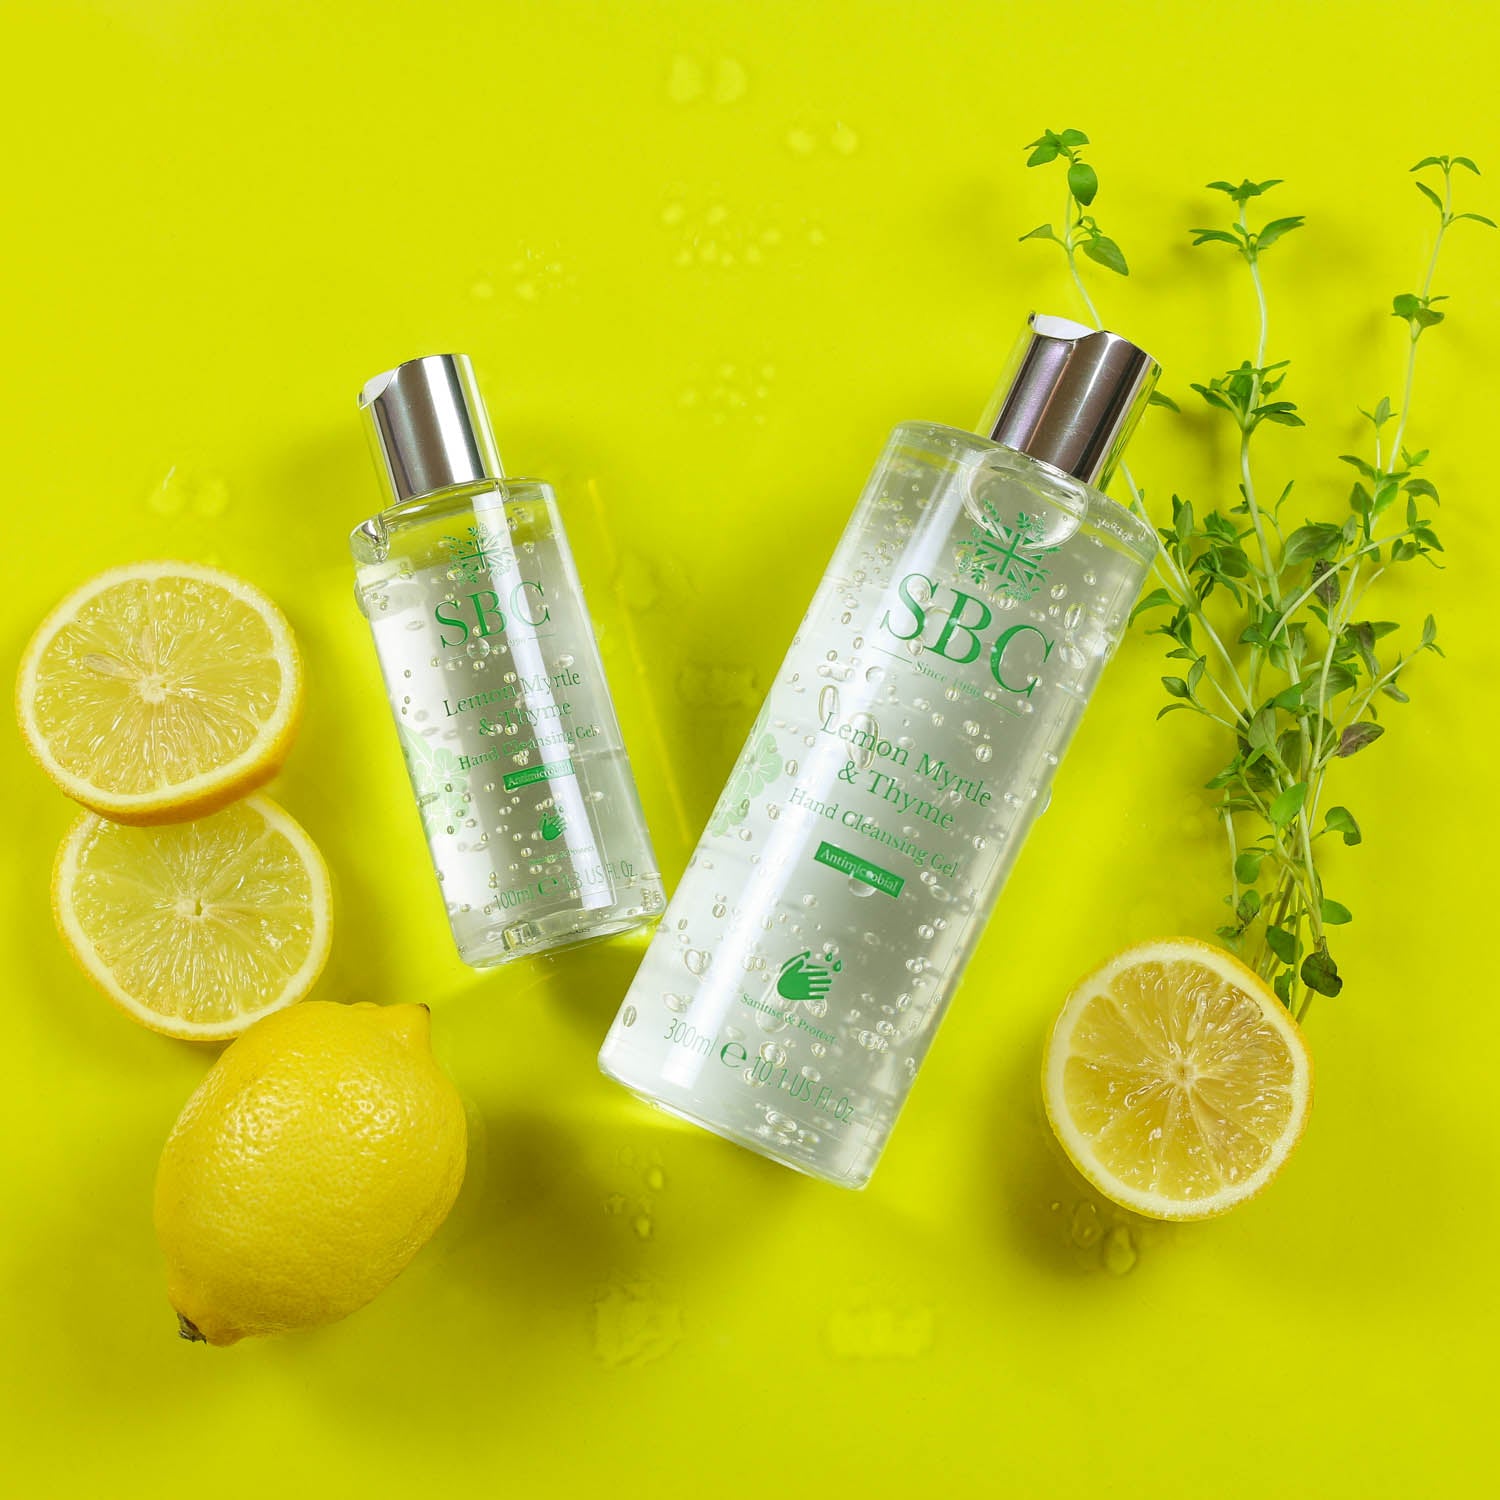 100ml and 300ml Lemon Myrtle & Thyme Hand Cleansing Gel on a bright yellow background with sliced lemons and herbs 